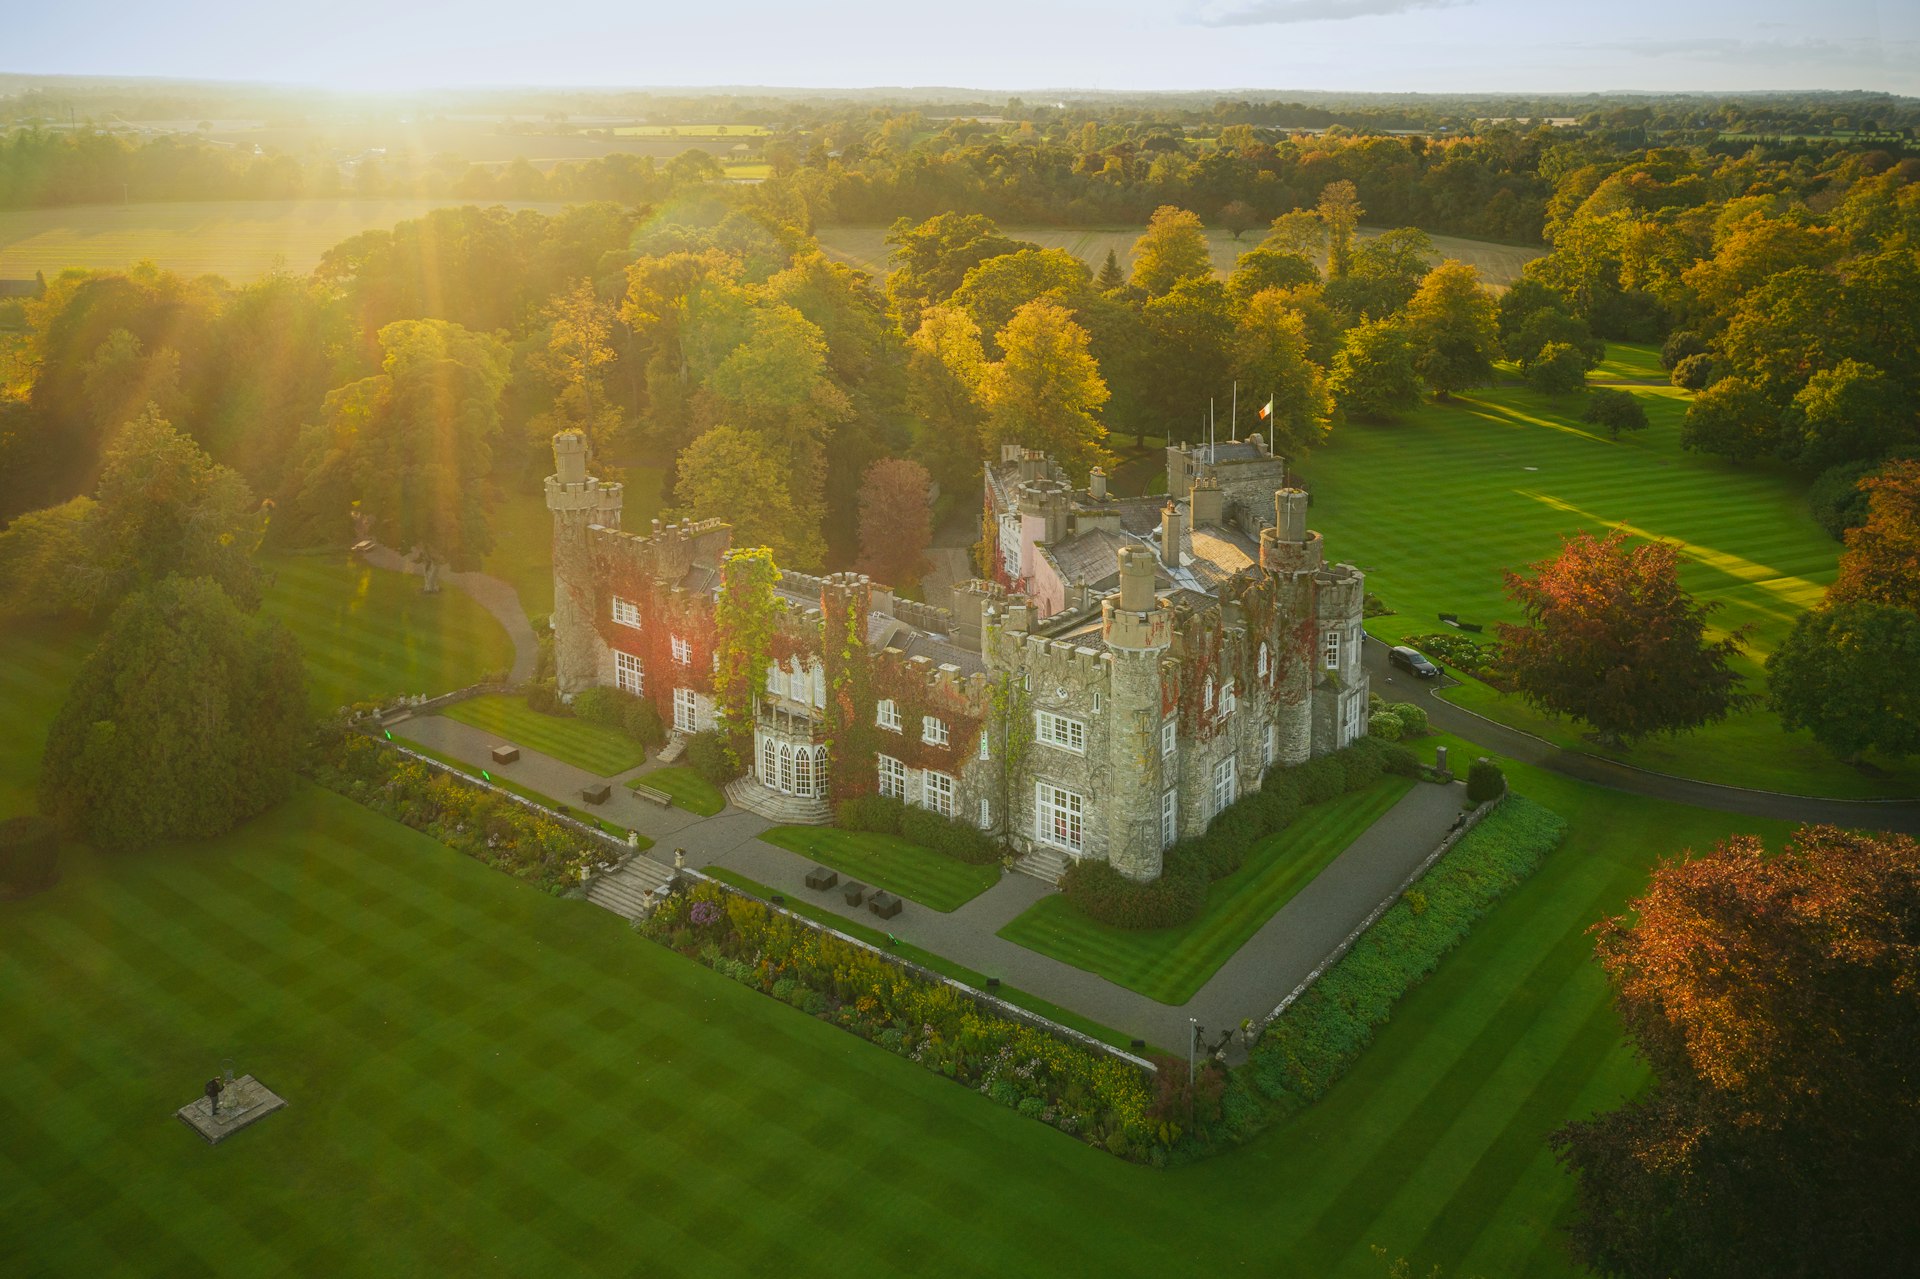 An aerial view of the 15-century Luttrellstown Castle, Ireland in the morning sunshine in Dublin